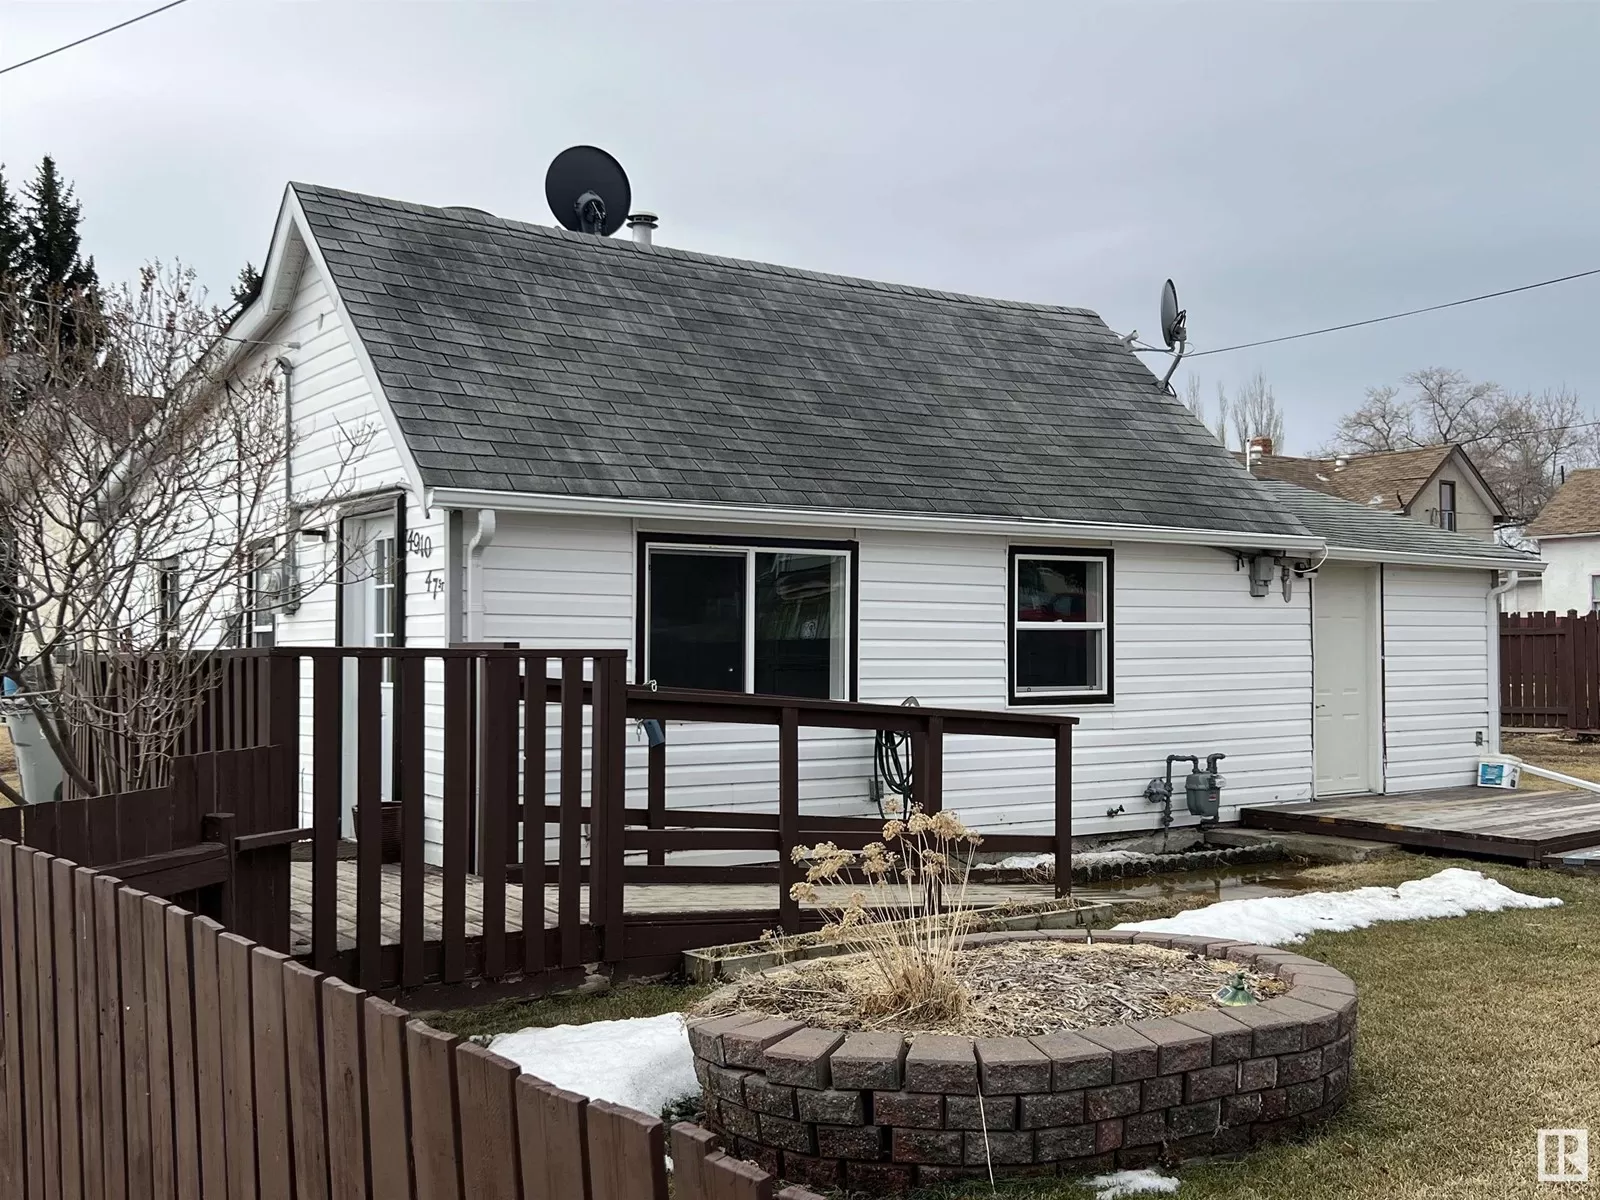 House for rent: 4910 47 St, Legal, Alberta T0G 1L0